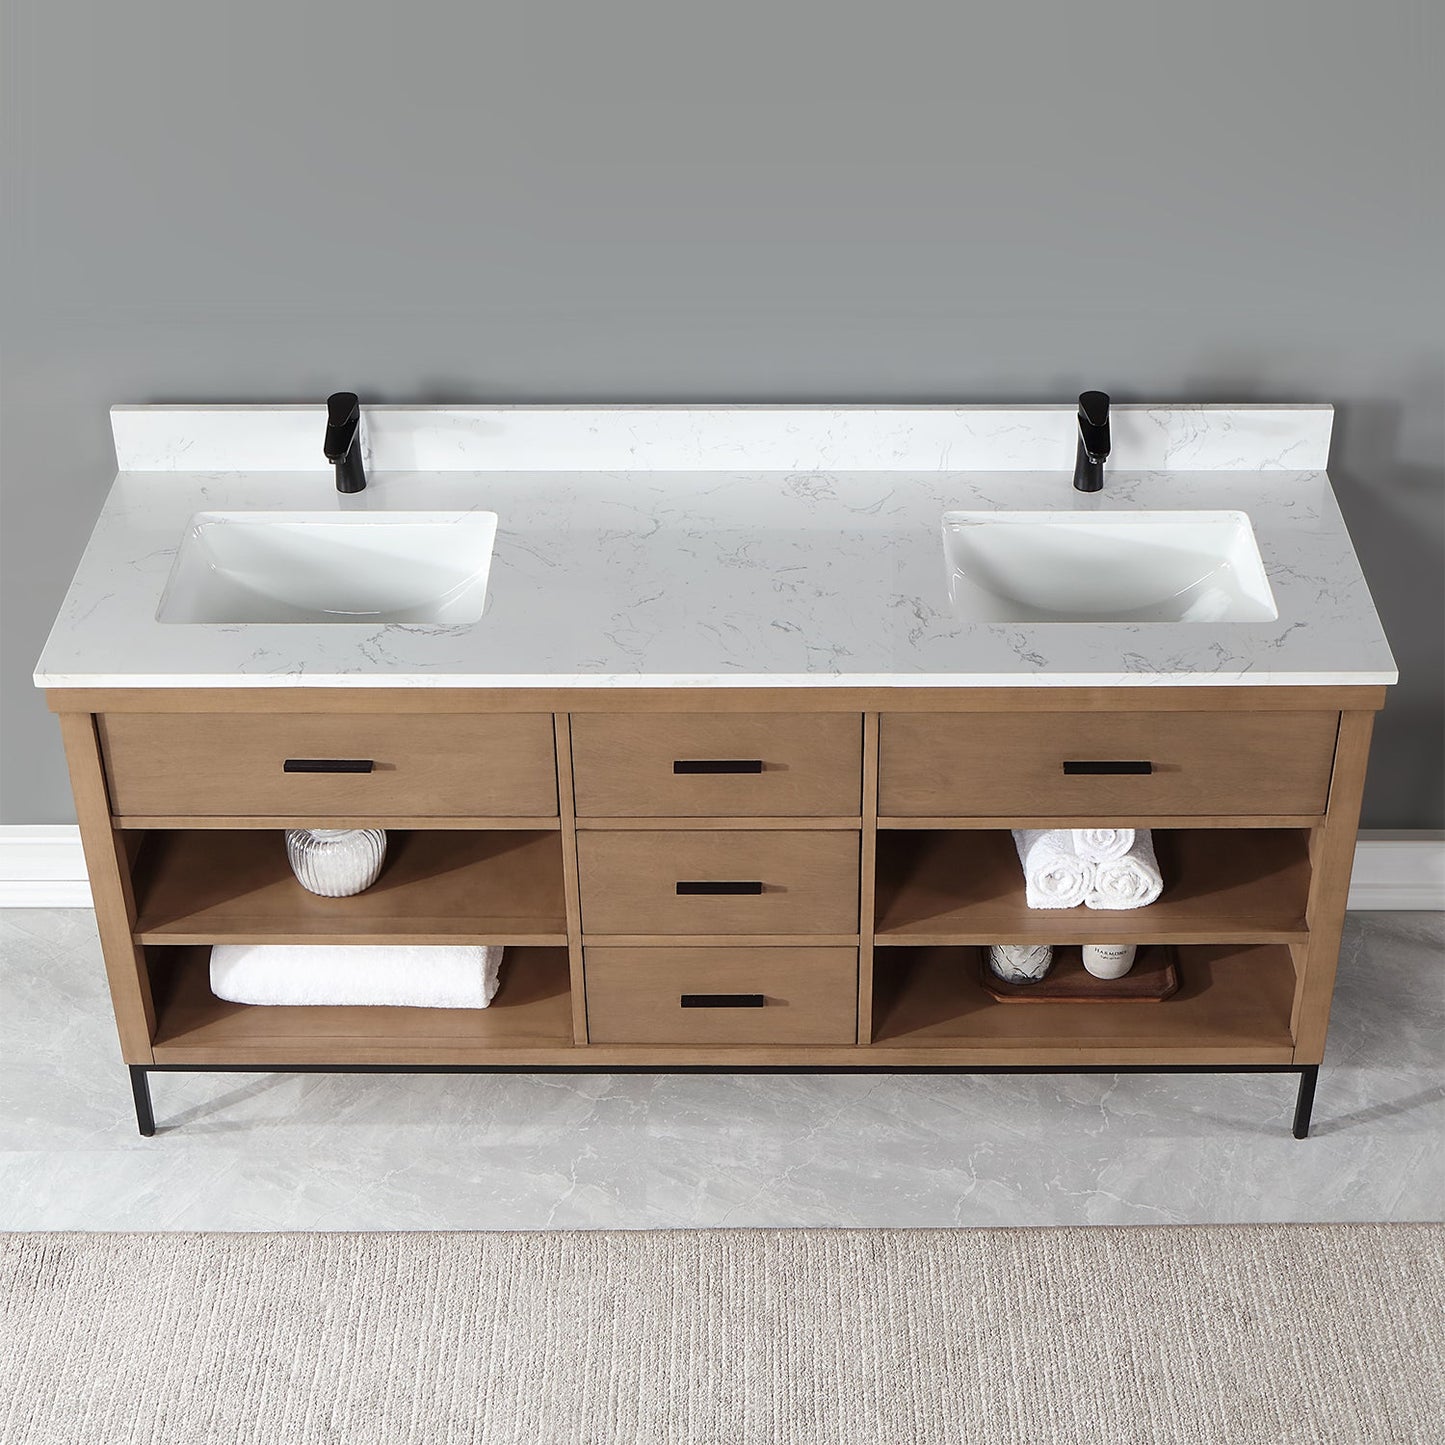 Kesia 72" Double Bathroom Vanity Set in Brown Pine with Aosta White Composite Stone Countertop without Mirror